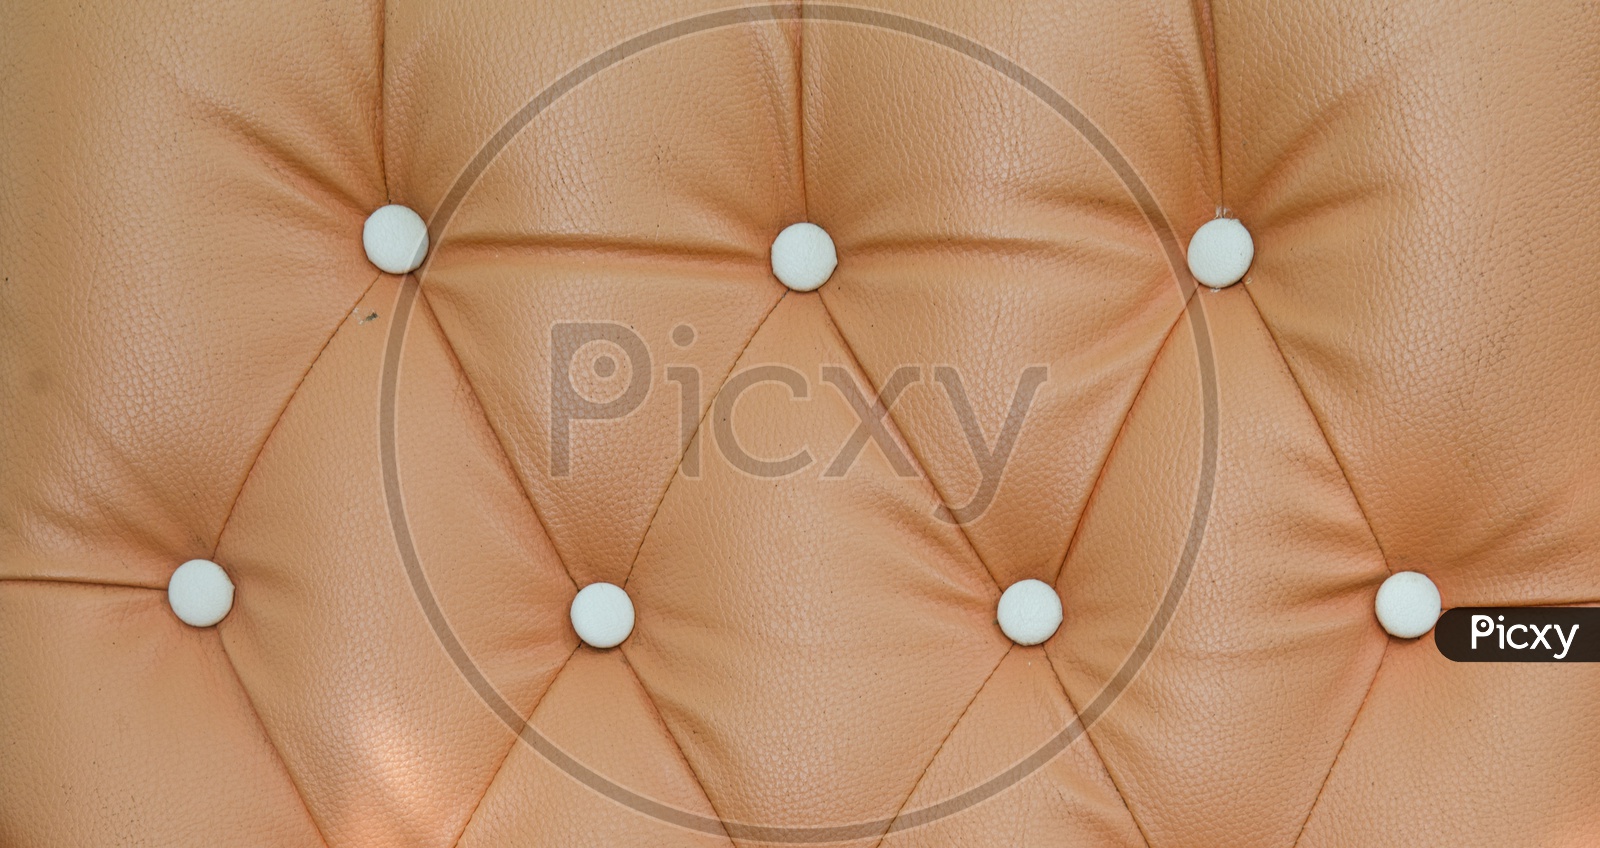 Leather Sofa Texture Forming a Background